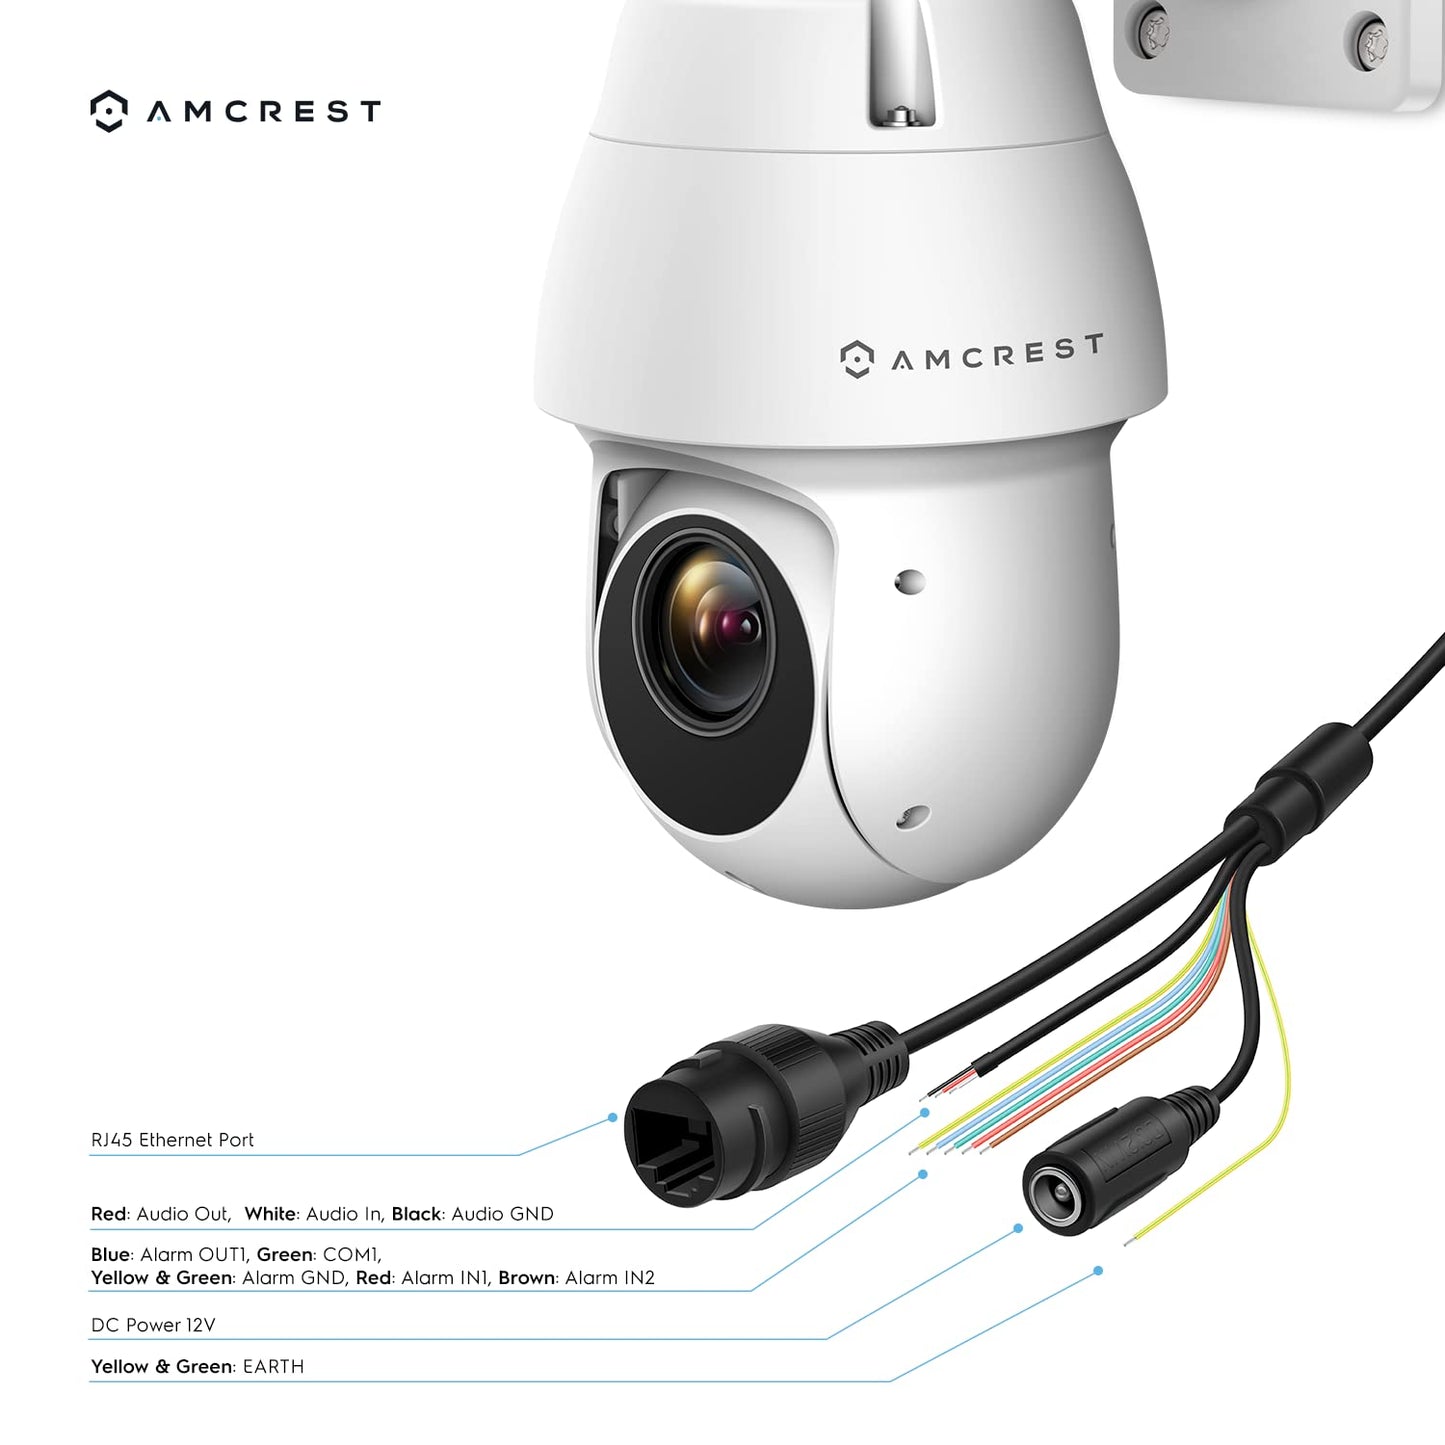 Amcrest 4MP Outdoor PTZ POE + AI IP Camera Pan Tilt Zoom (Optical 25x Motorized) Security Speed Dome, People and Vehicle Detection AI, Face Detection, 328ft Night Vision POE+ (802.3at) IP4M-1063EW-AI